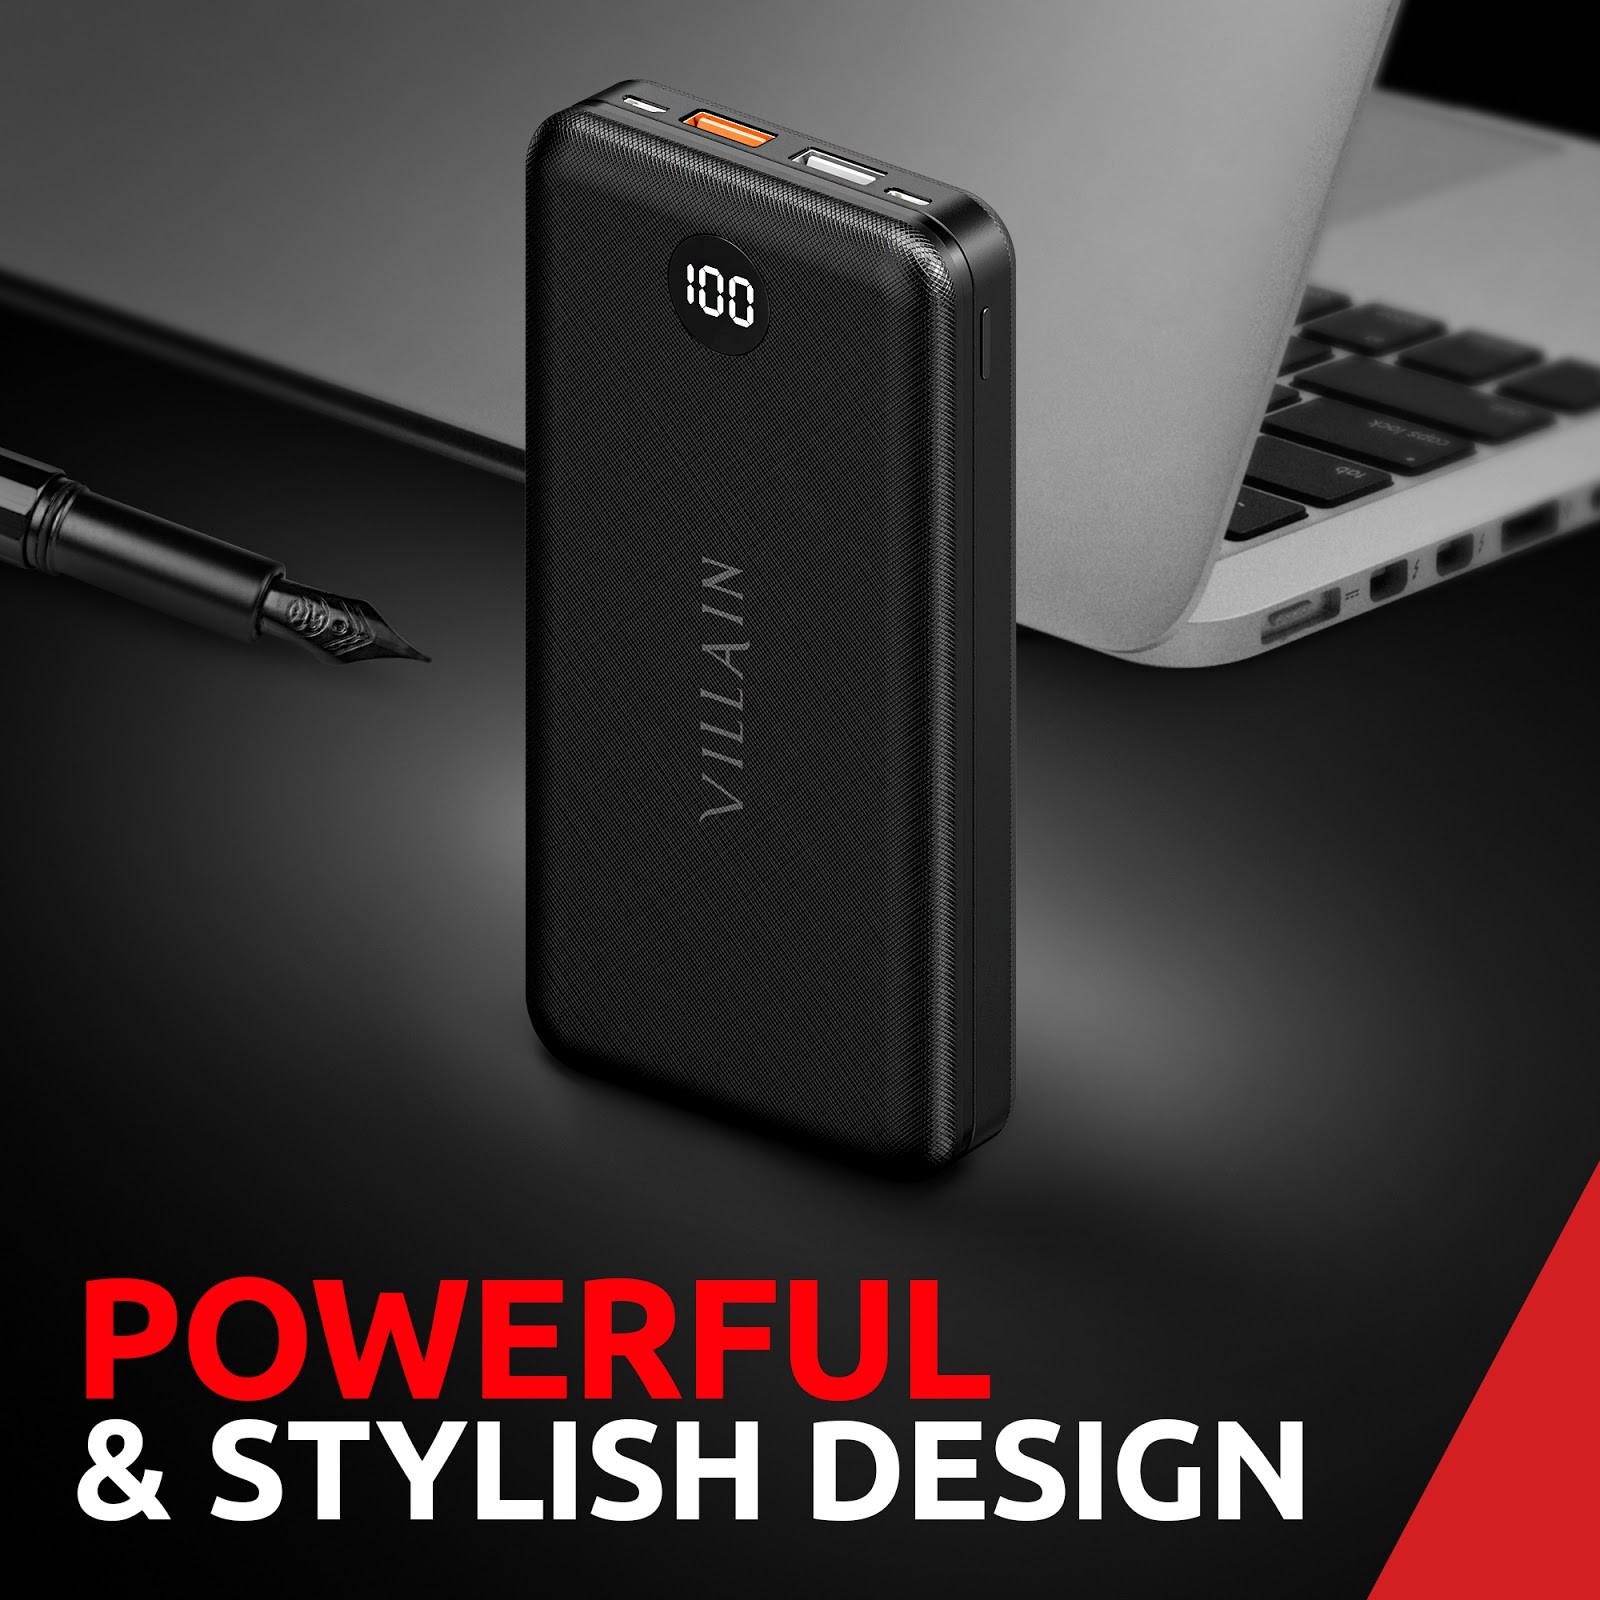 Best Portable mobile Charger - power bank charger 20000mah - best power bank - portable battery charger - portable battery charger for phone